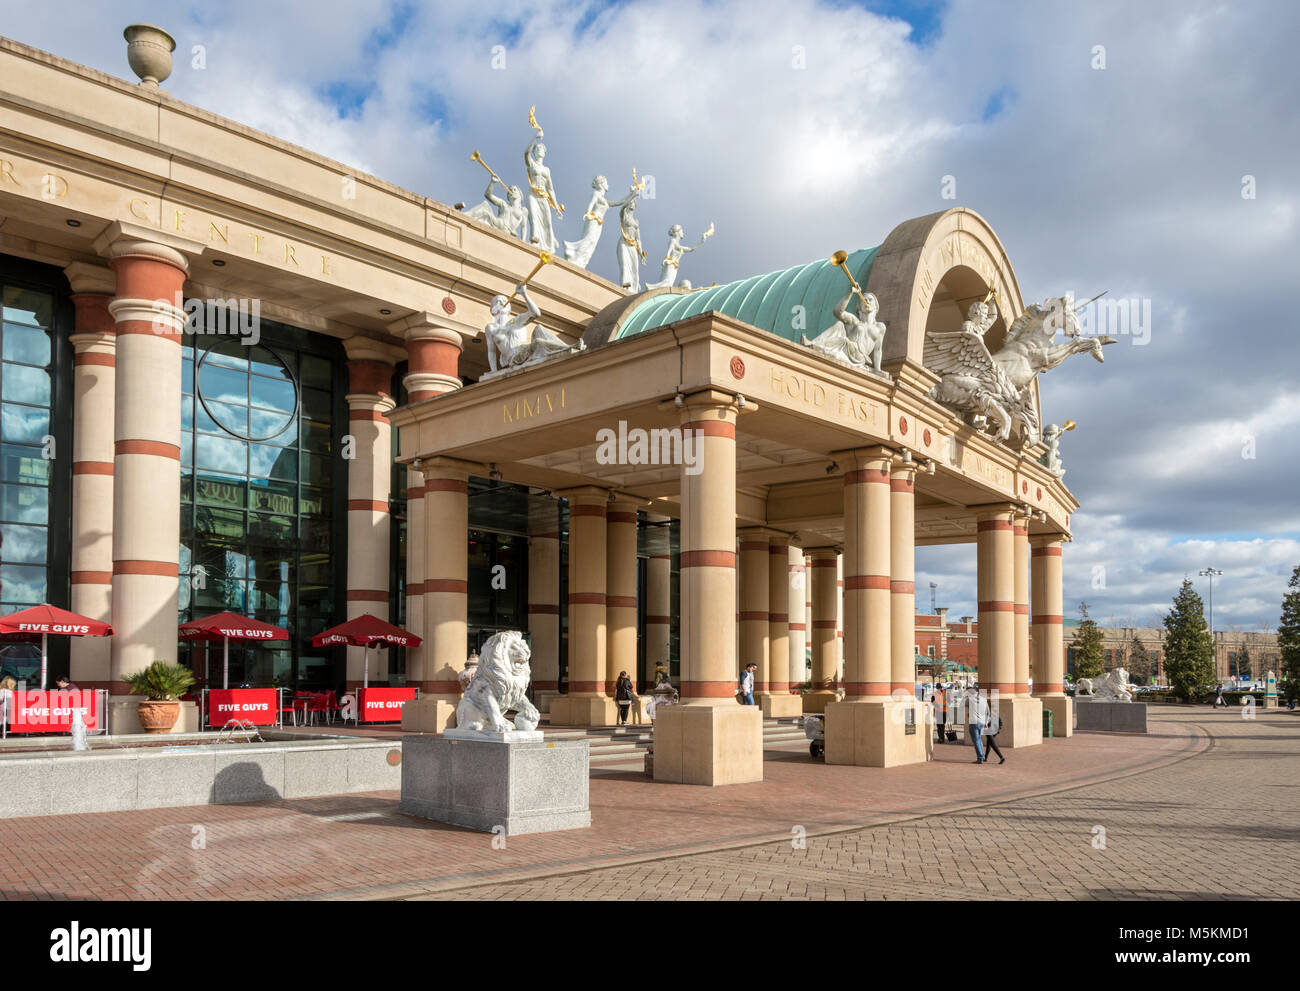 Entrance to the intu Trafford Centre, Manchester, UK Stock Photo